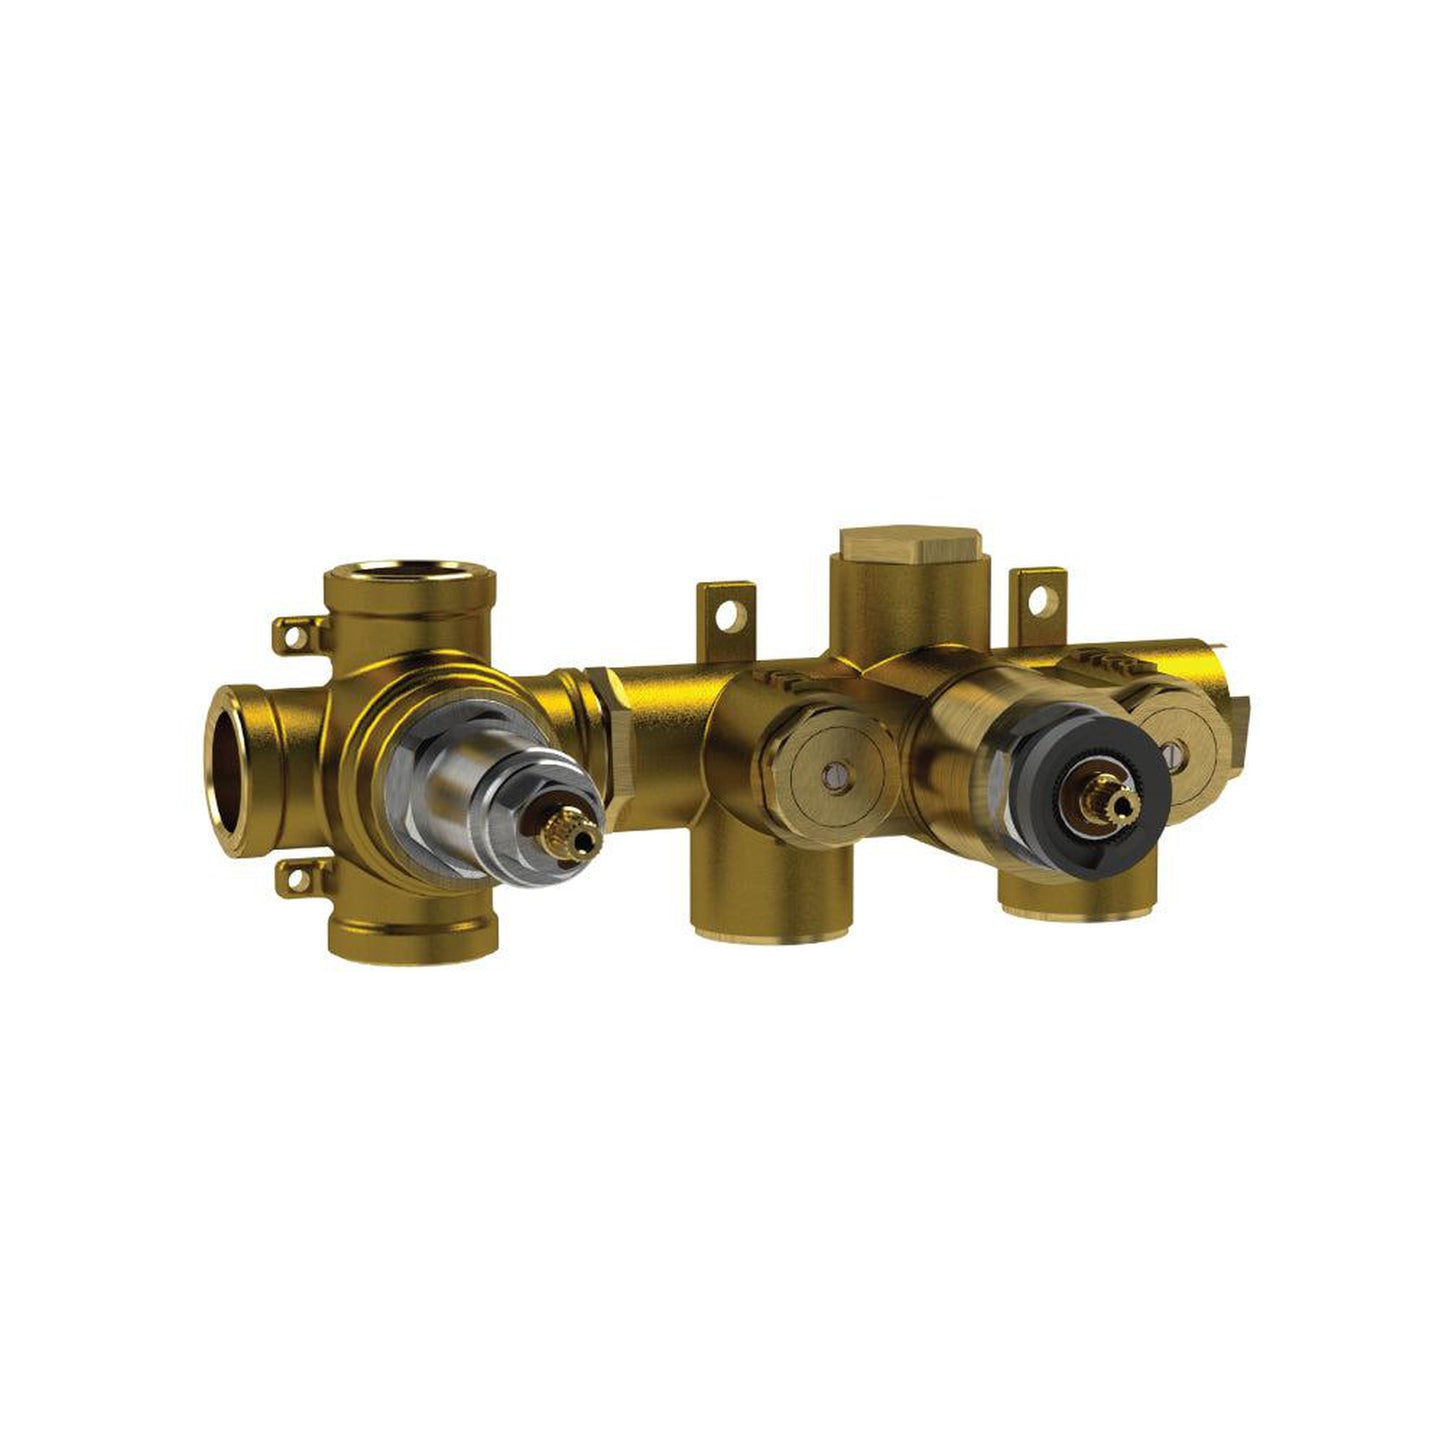 Isenberg Universal Fixtures 3/4" Three Output Thermostatic Valve in Rough Brass (TVH.2705F)